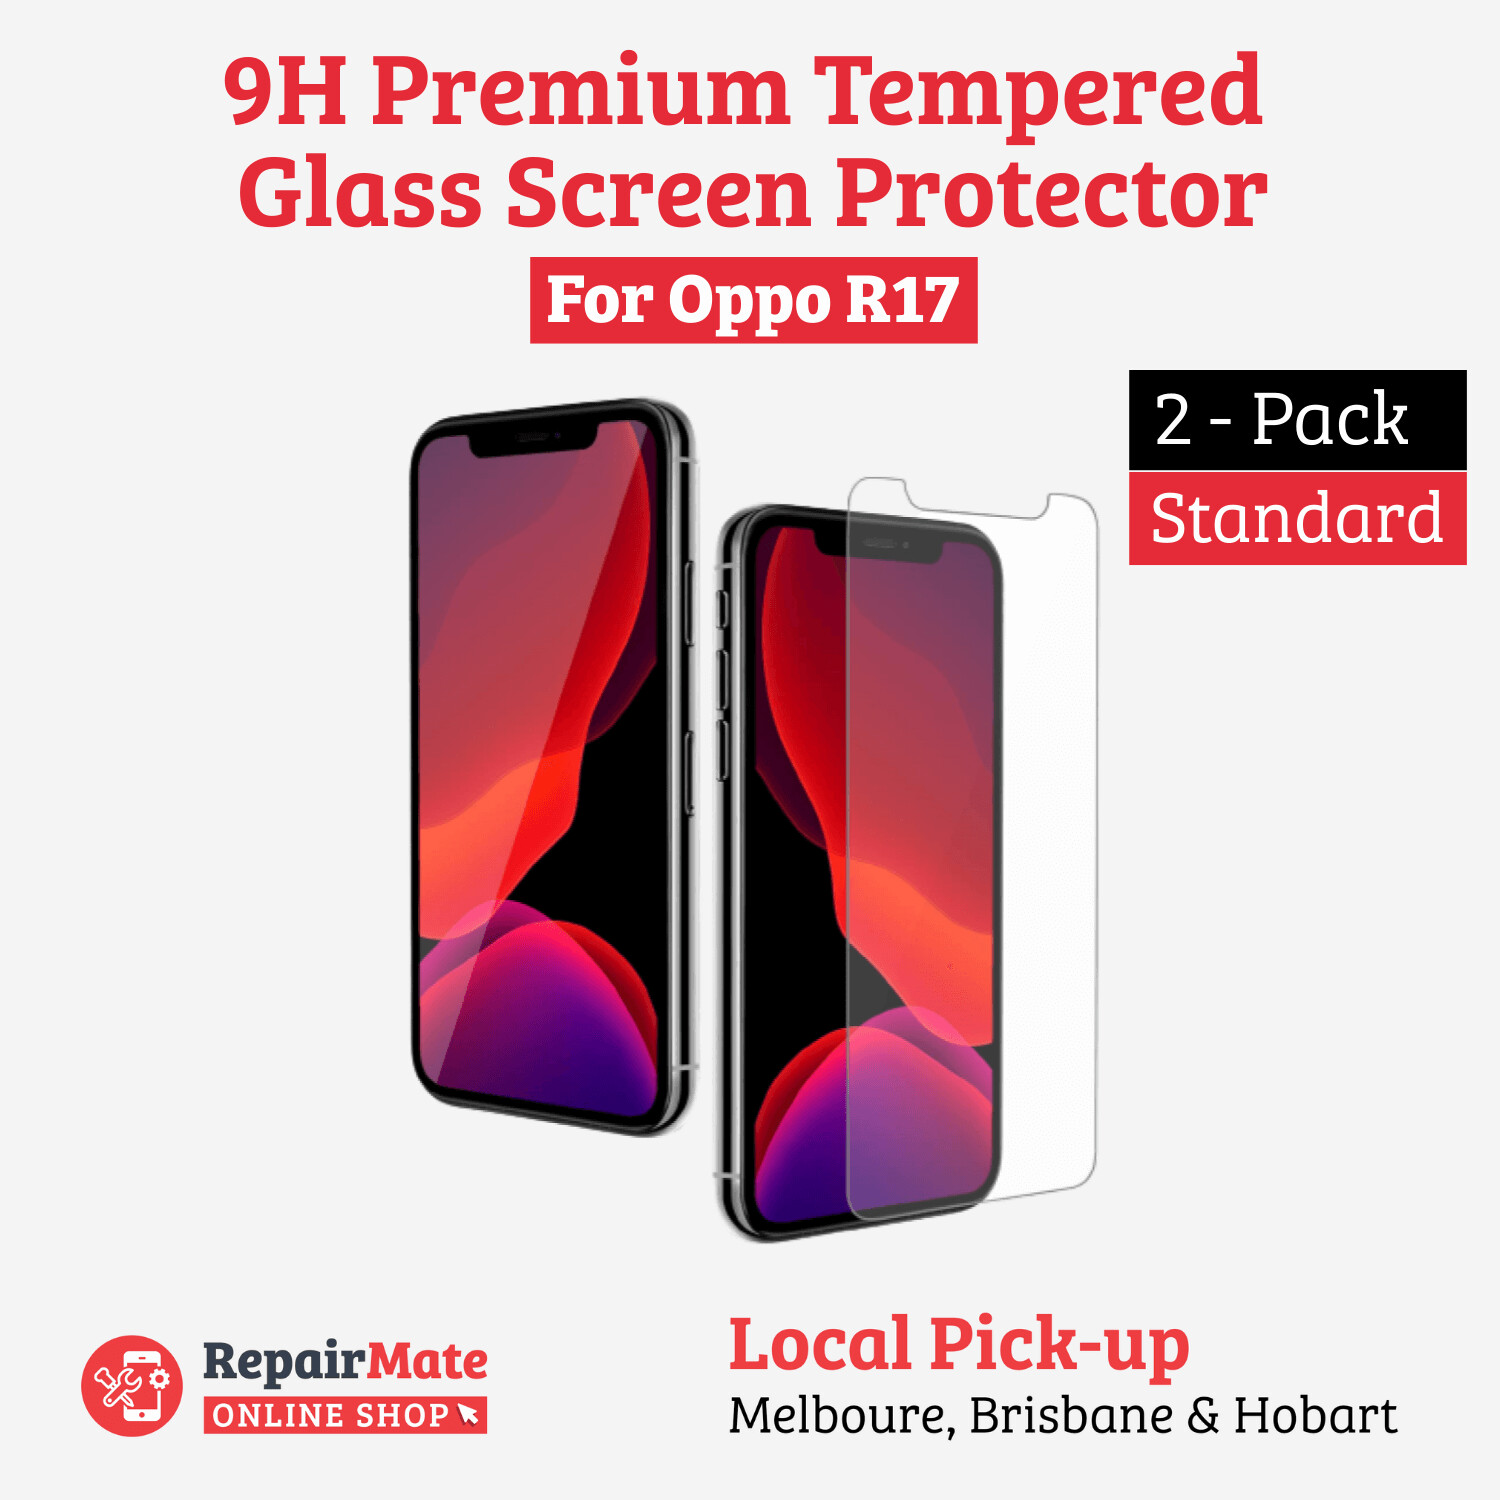 Oppo R17 9H Premium Tempered Glass Screen Protector [2 Pack]